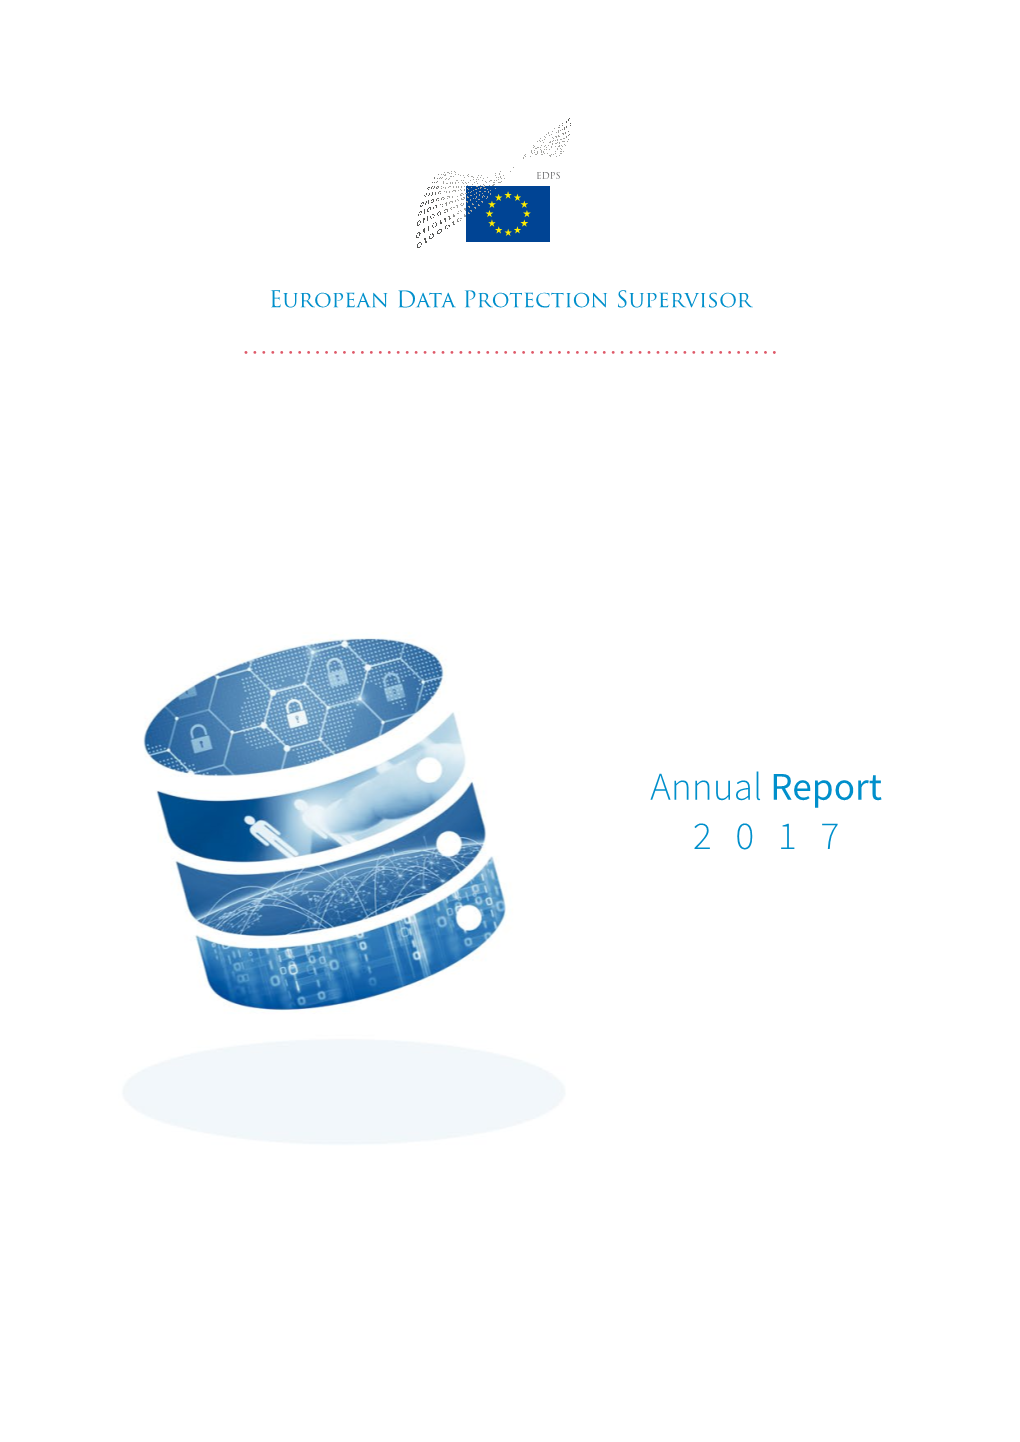 Annual Report 2017 an Executive Summary of This Report, Which Gives an Overview of Key Developments in EDPS Activities in 2017, Is Also Available